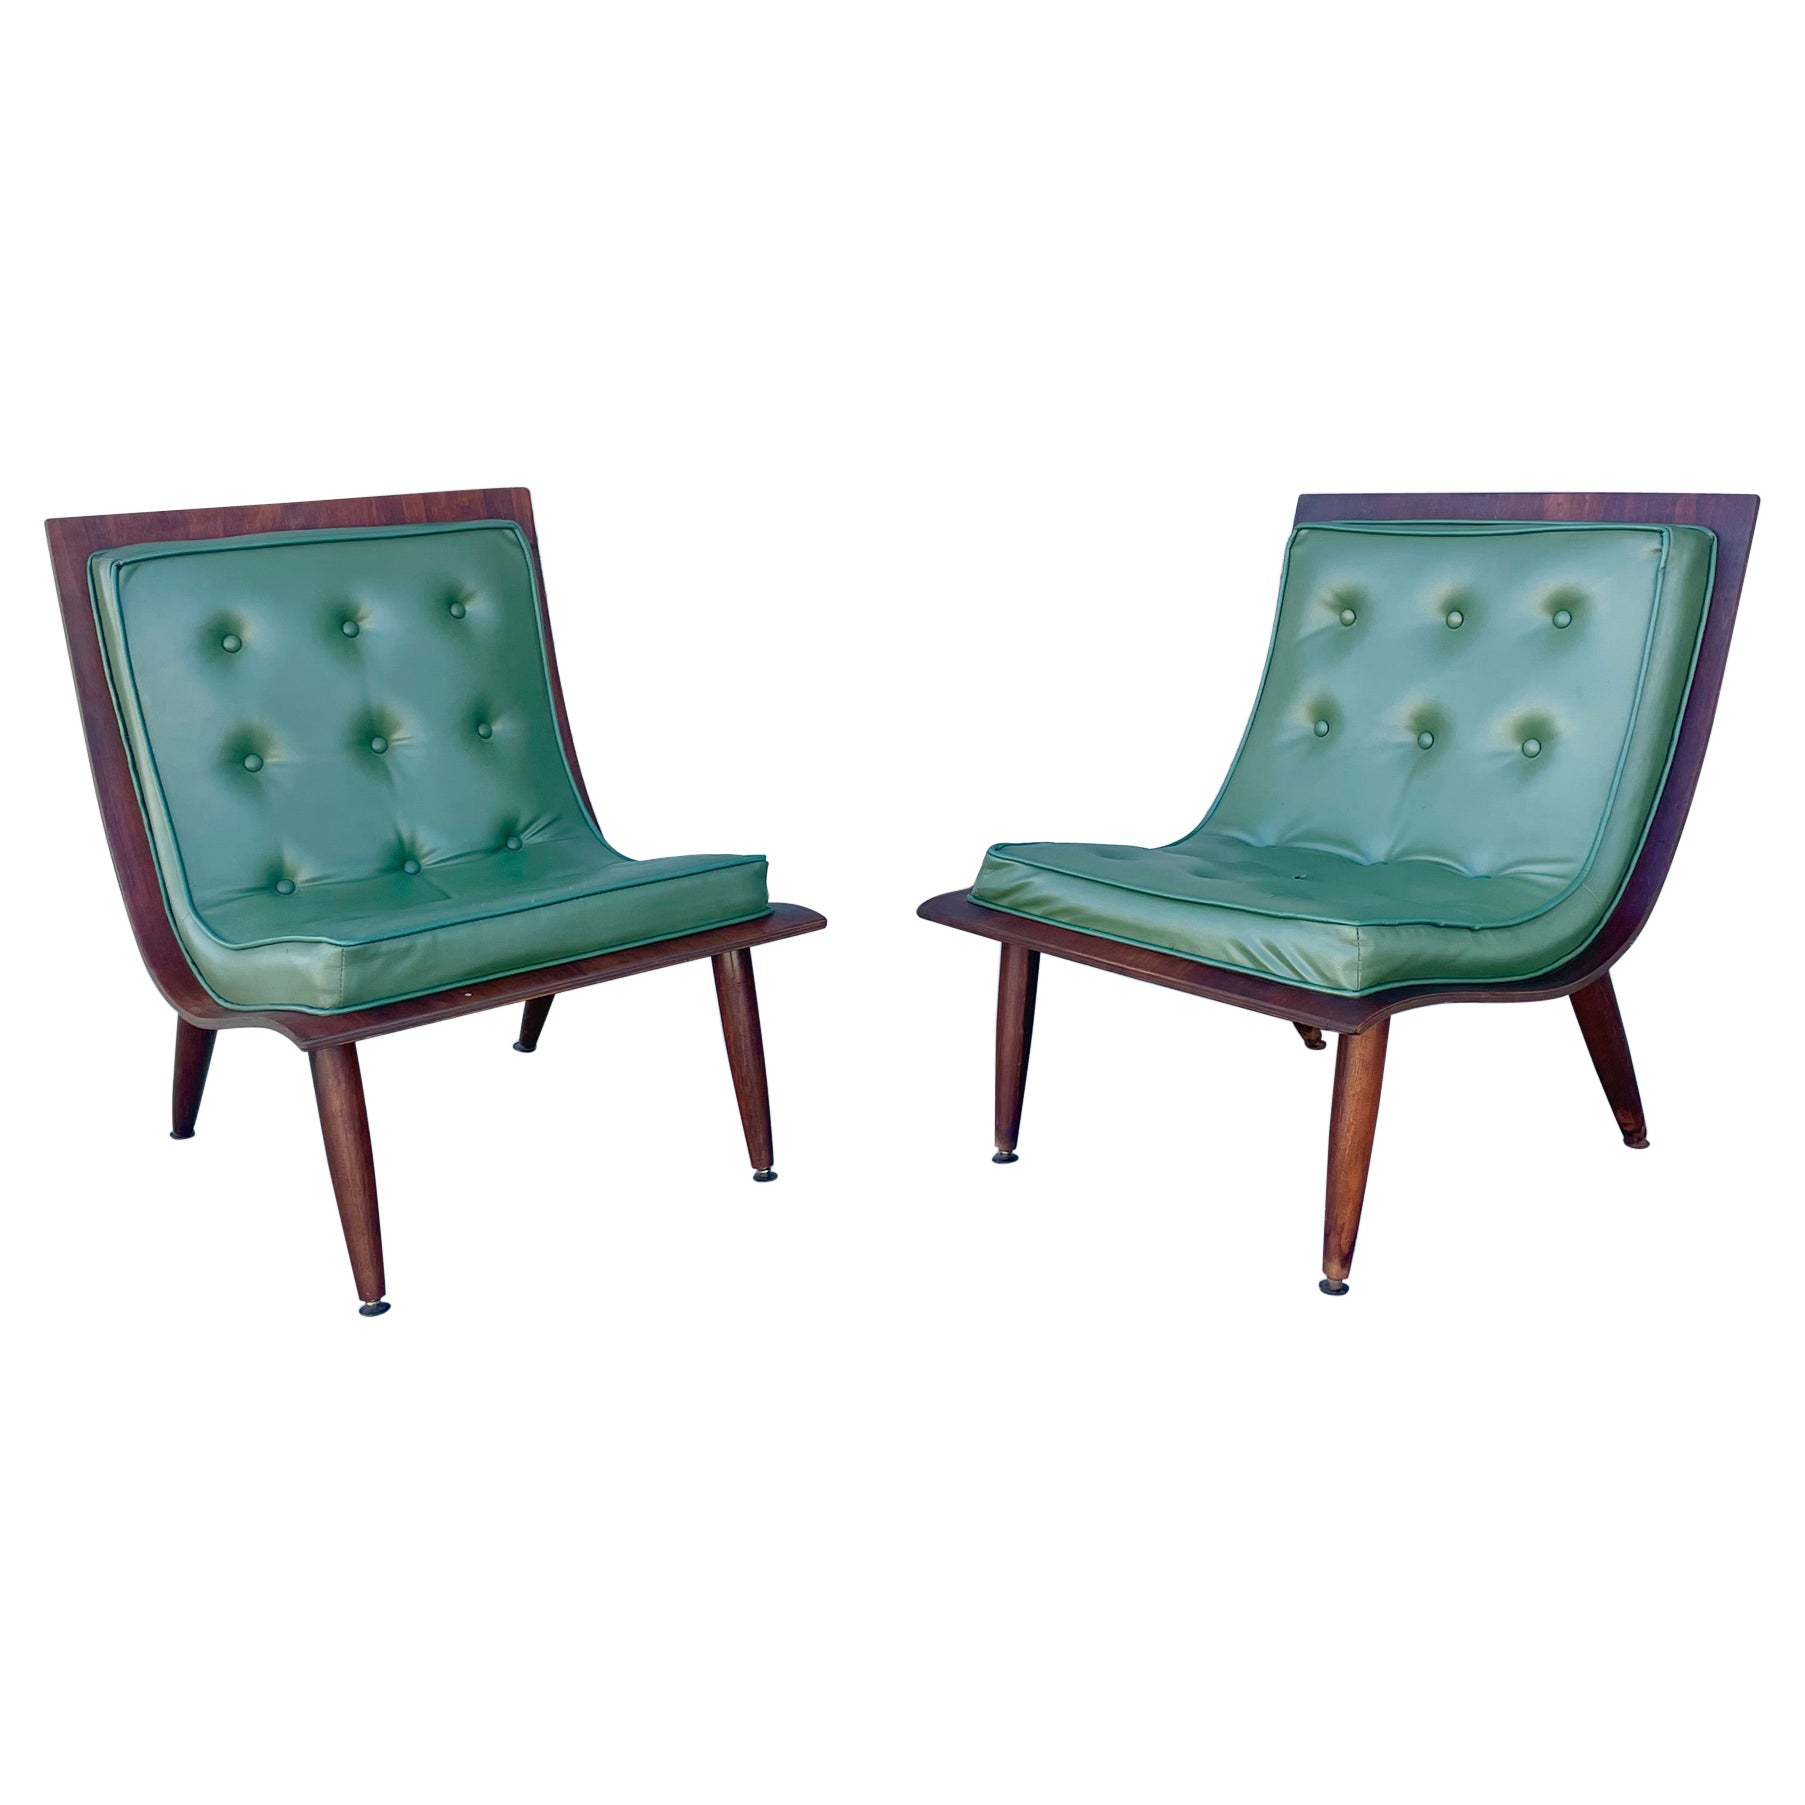 Vintage Scoop Lounge Chairs by Carter Brothers